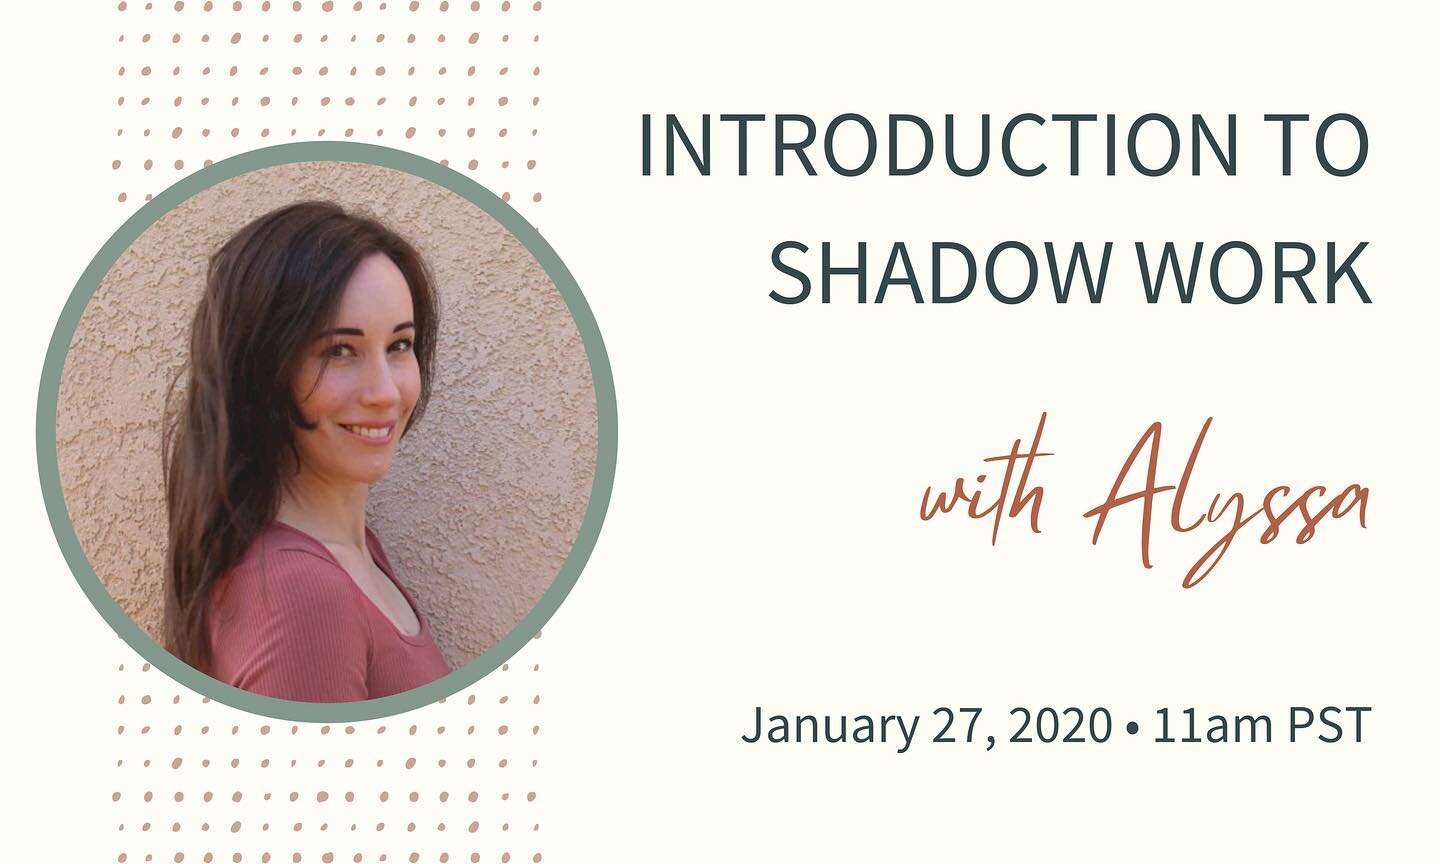 ‼️
Don&rsquo;t forgot to click on my link-in-bio to sign up for my workshop, Introduction to Shadow Work.
‼️

🎊 
To ring in the New Year I&rsquo;ve decided to offer this workshop FREE to my social media following!! Use code &lsquo;innercircle&rsquo;